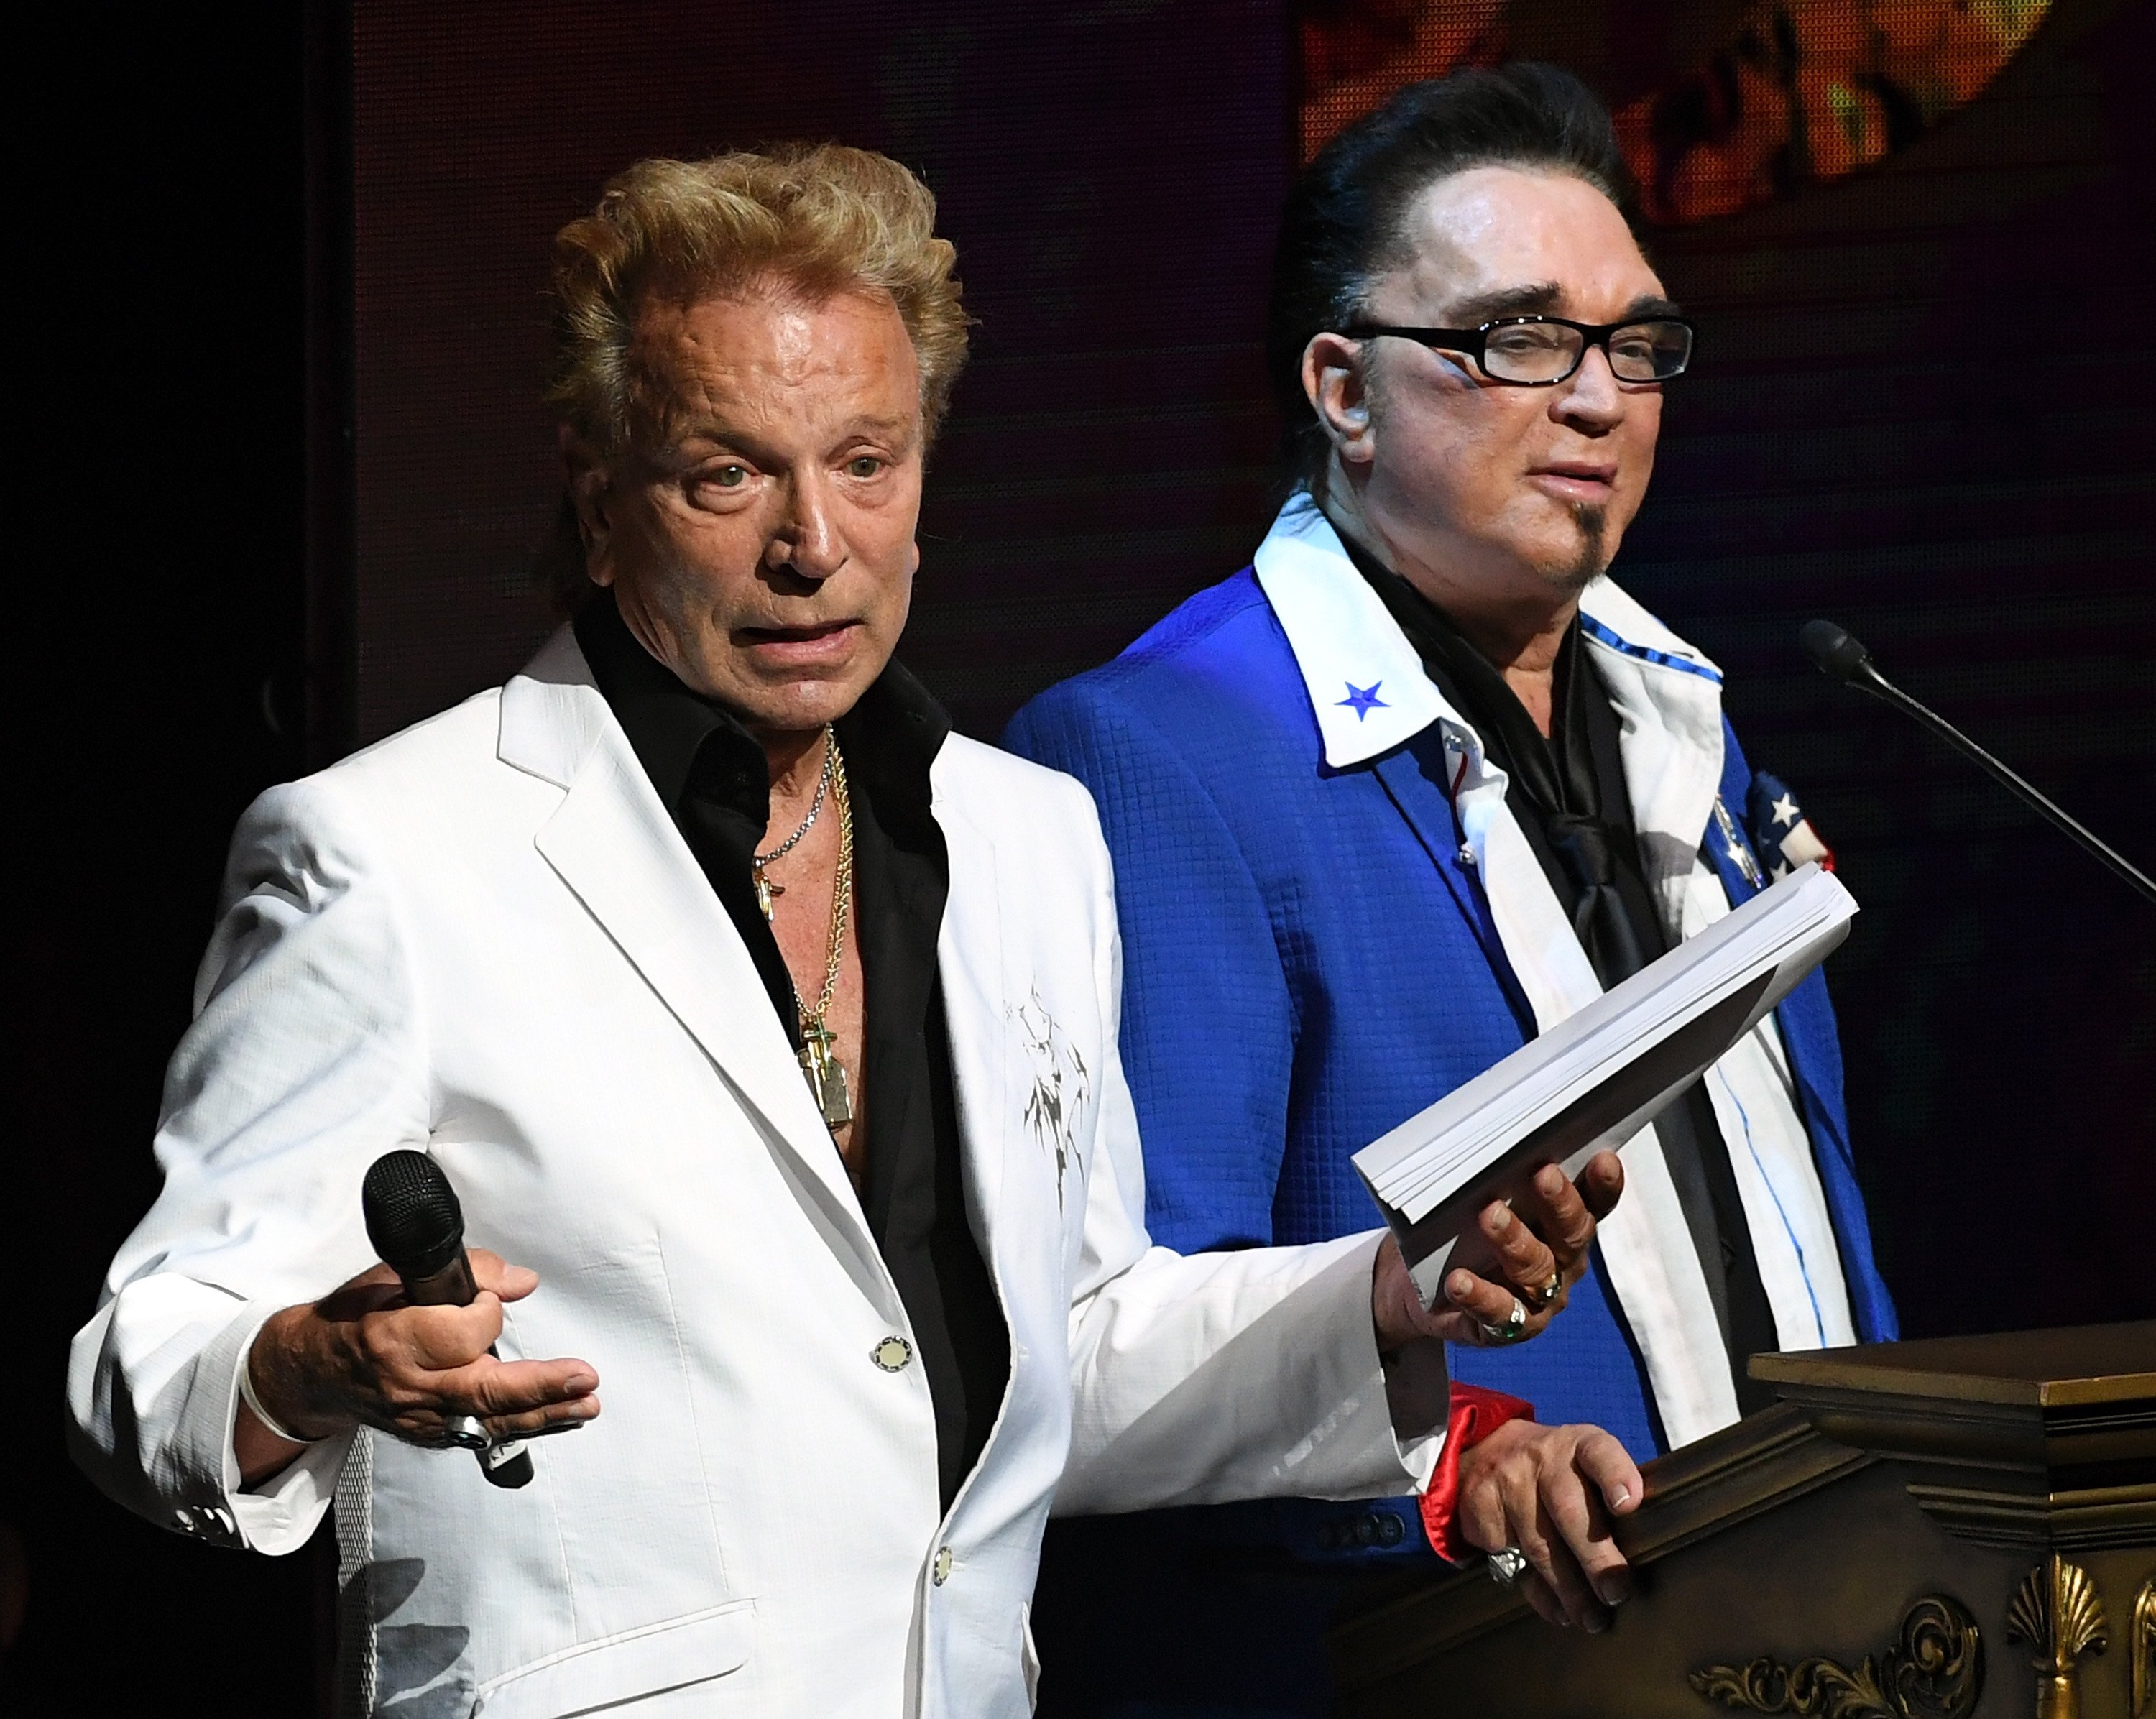 Siegfried Fischbacher (L) and Roy Horn (R) speaking at the HELP event in Las Vegas in September, 2016. | Photo: Getty Images. 